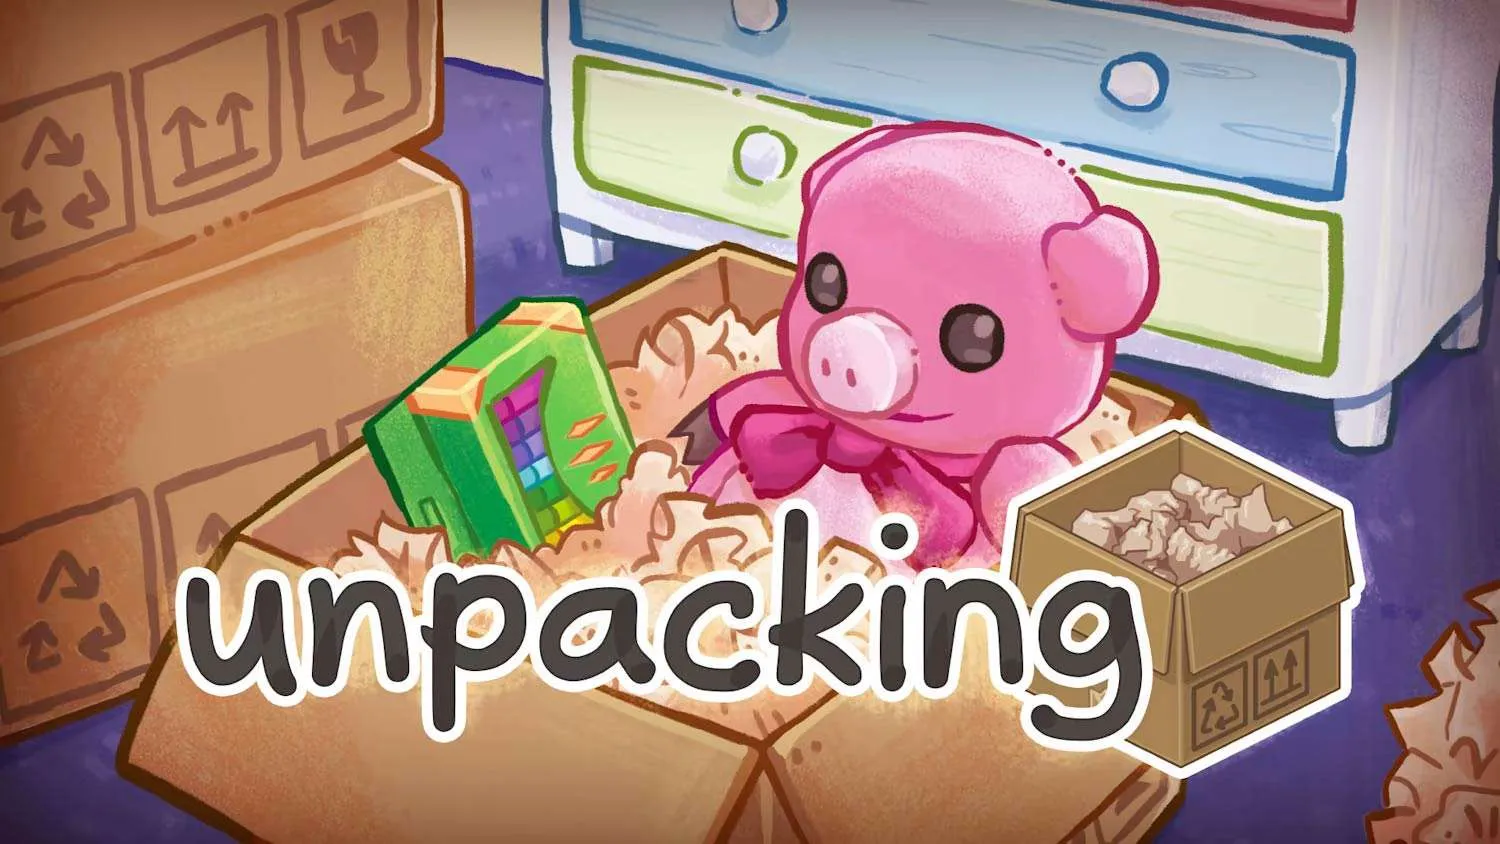 Unpacking coming to PS4 and PS5